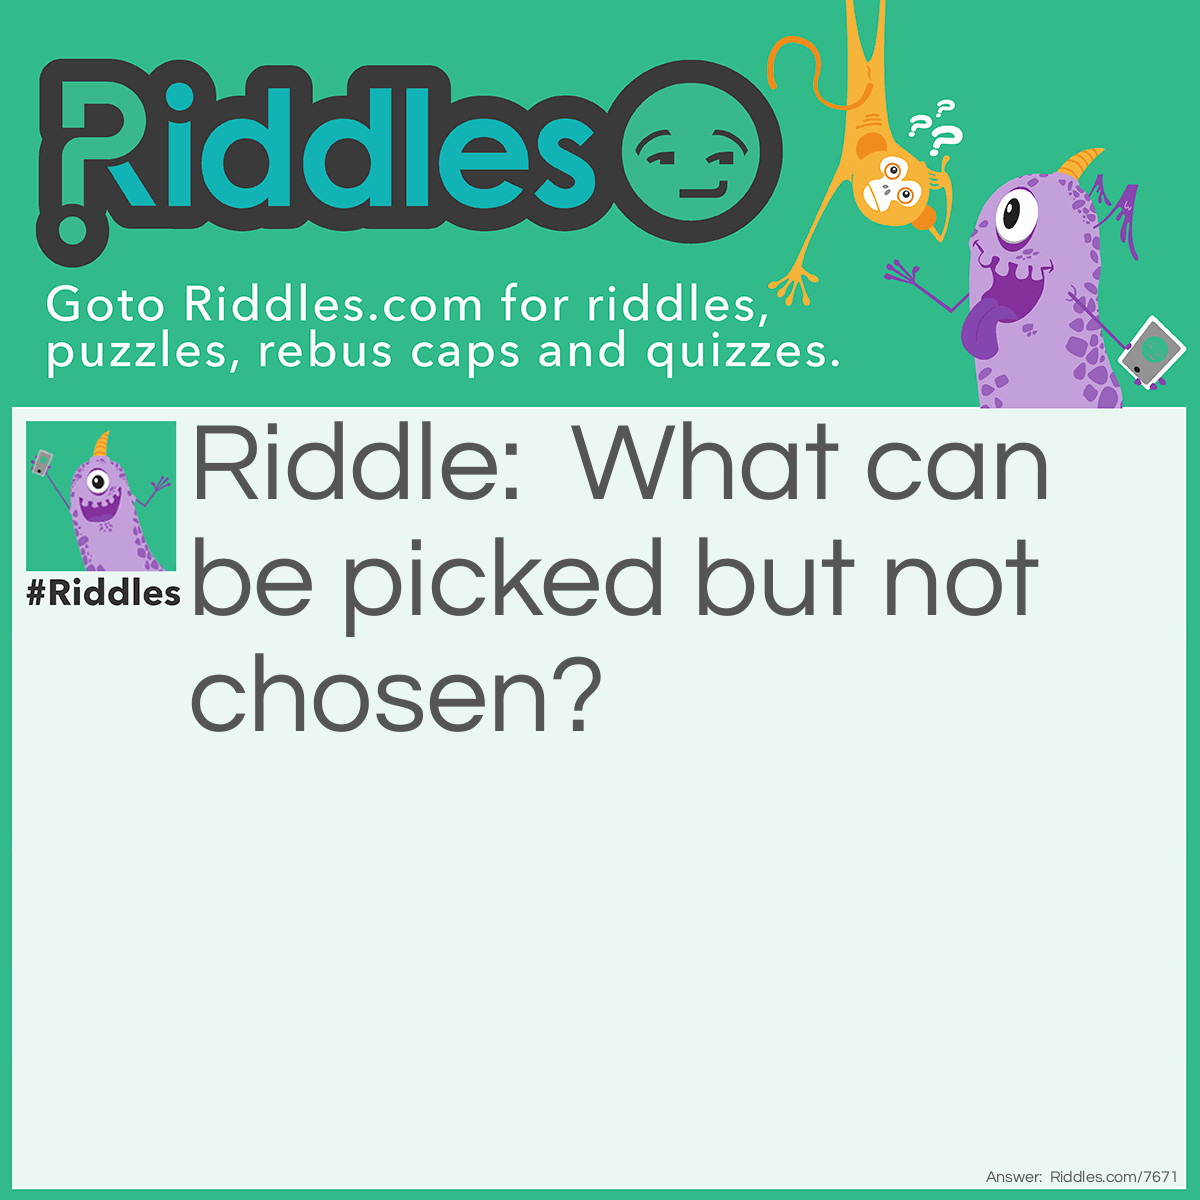 Riddle: What can be picked but not chosen? Answer: A nose.